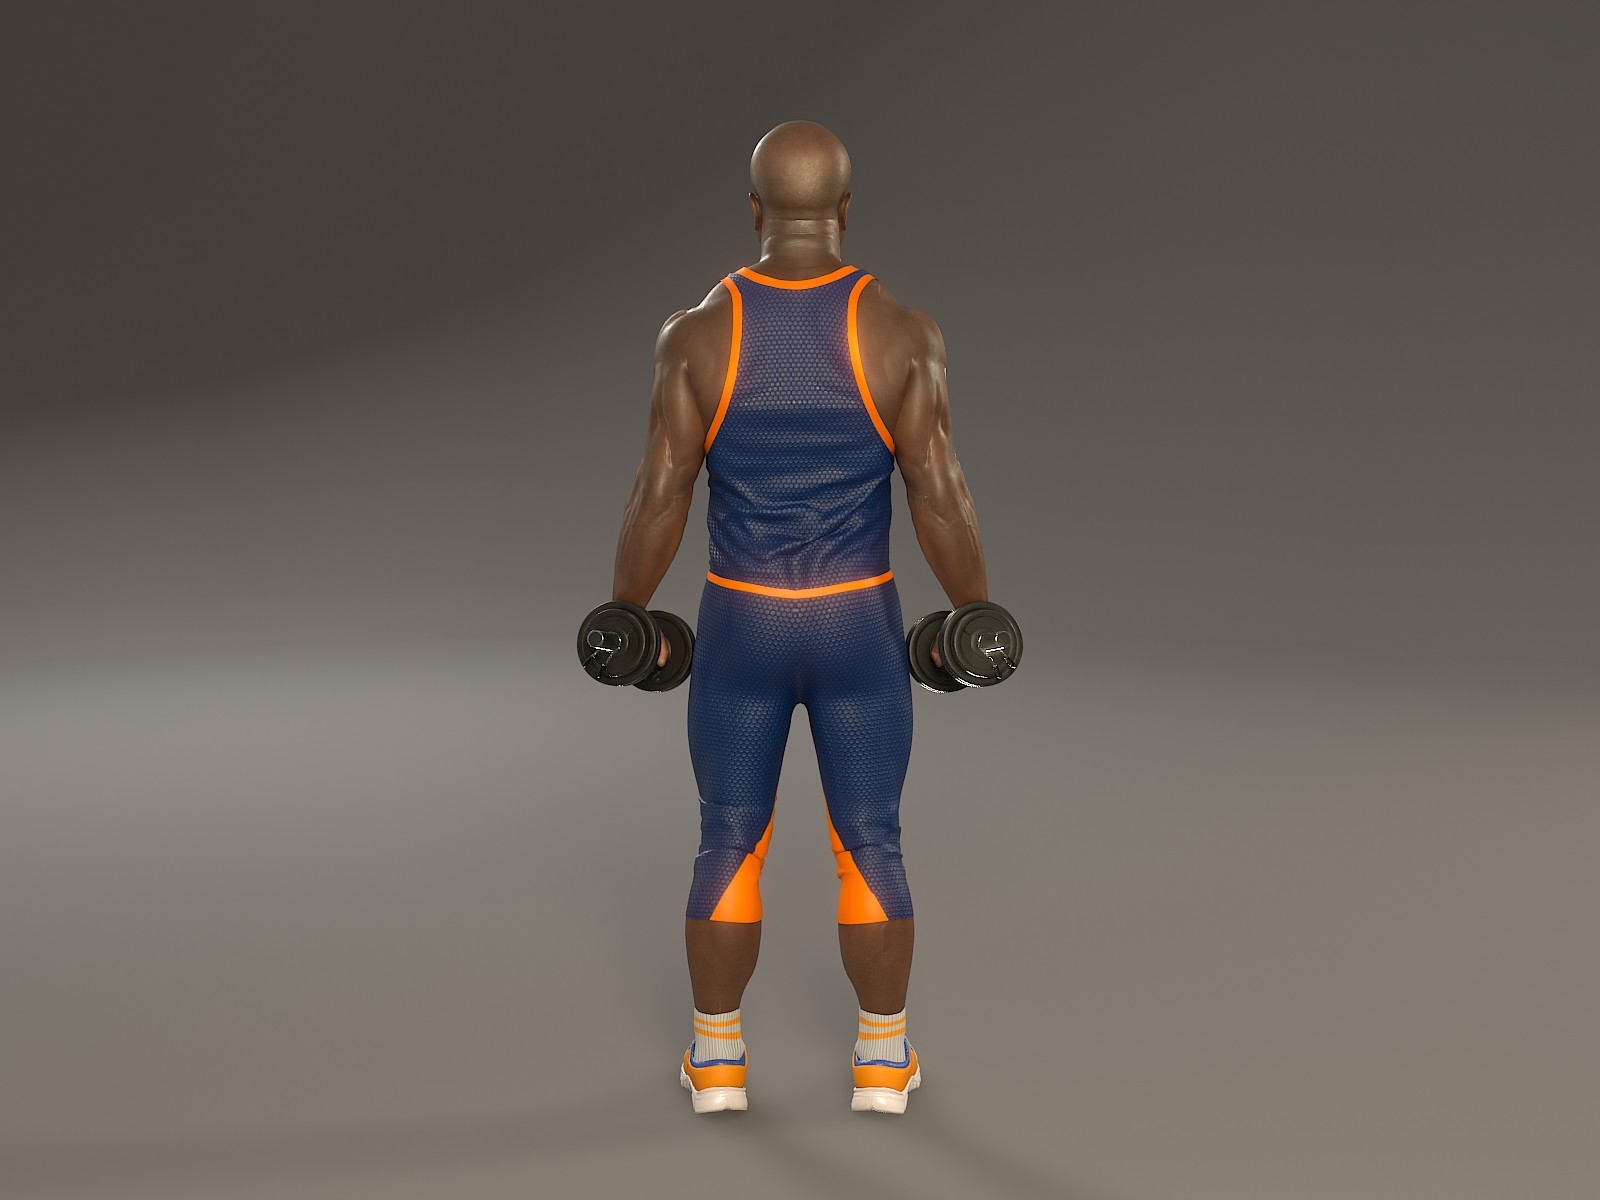 ArtStation - Fitness Male ABL 3140_0001 | Resources